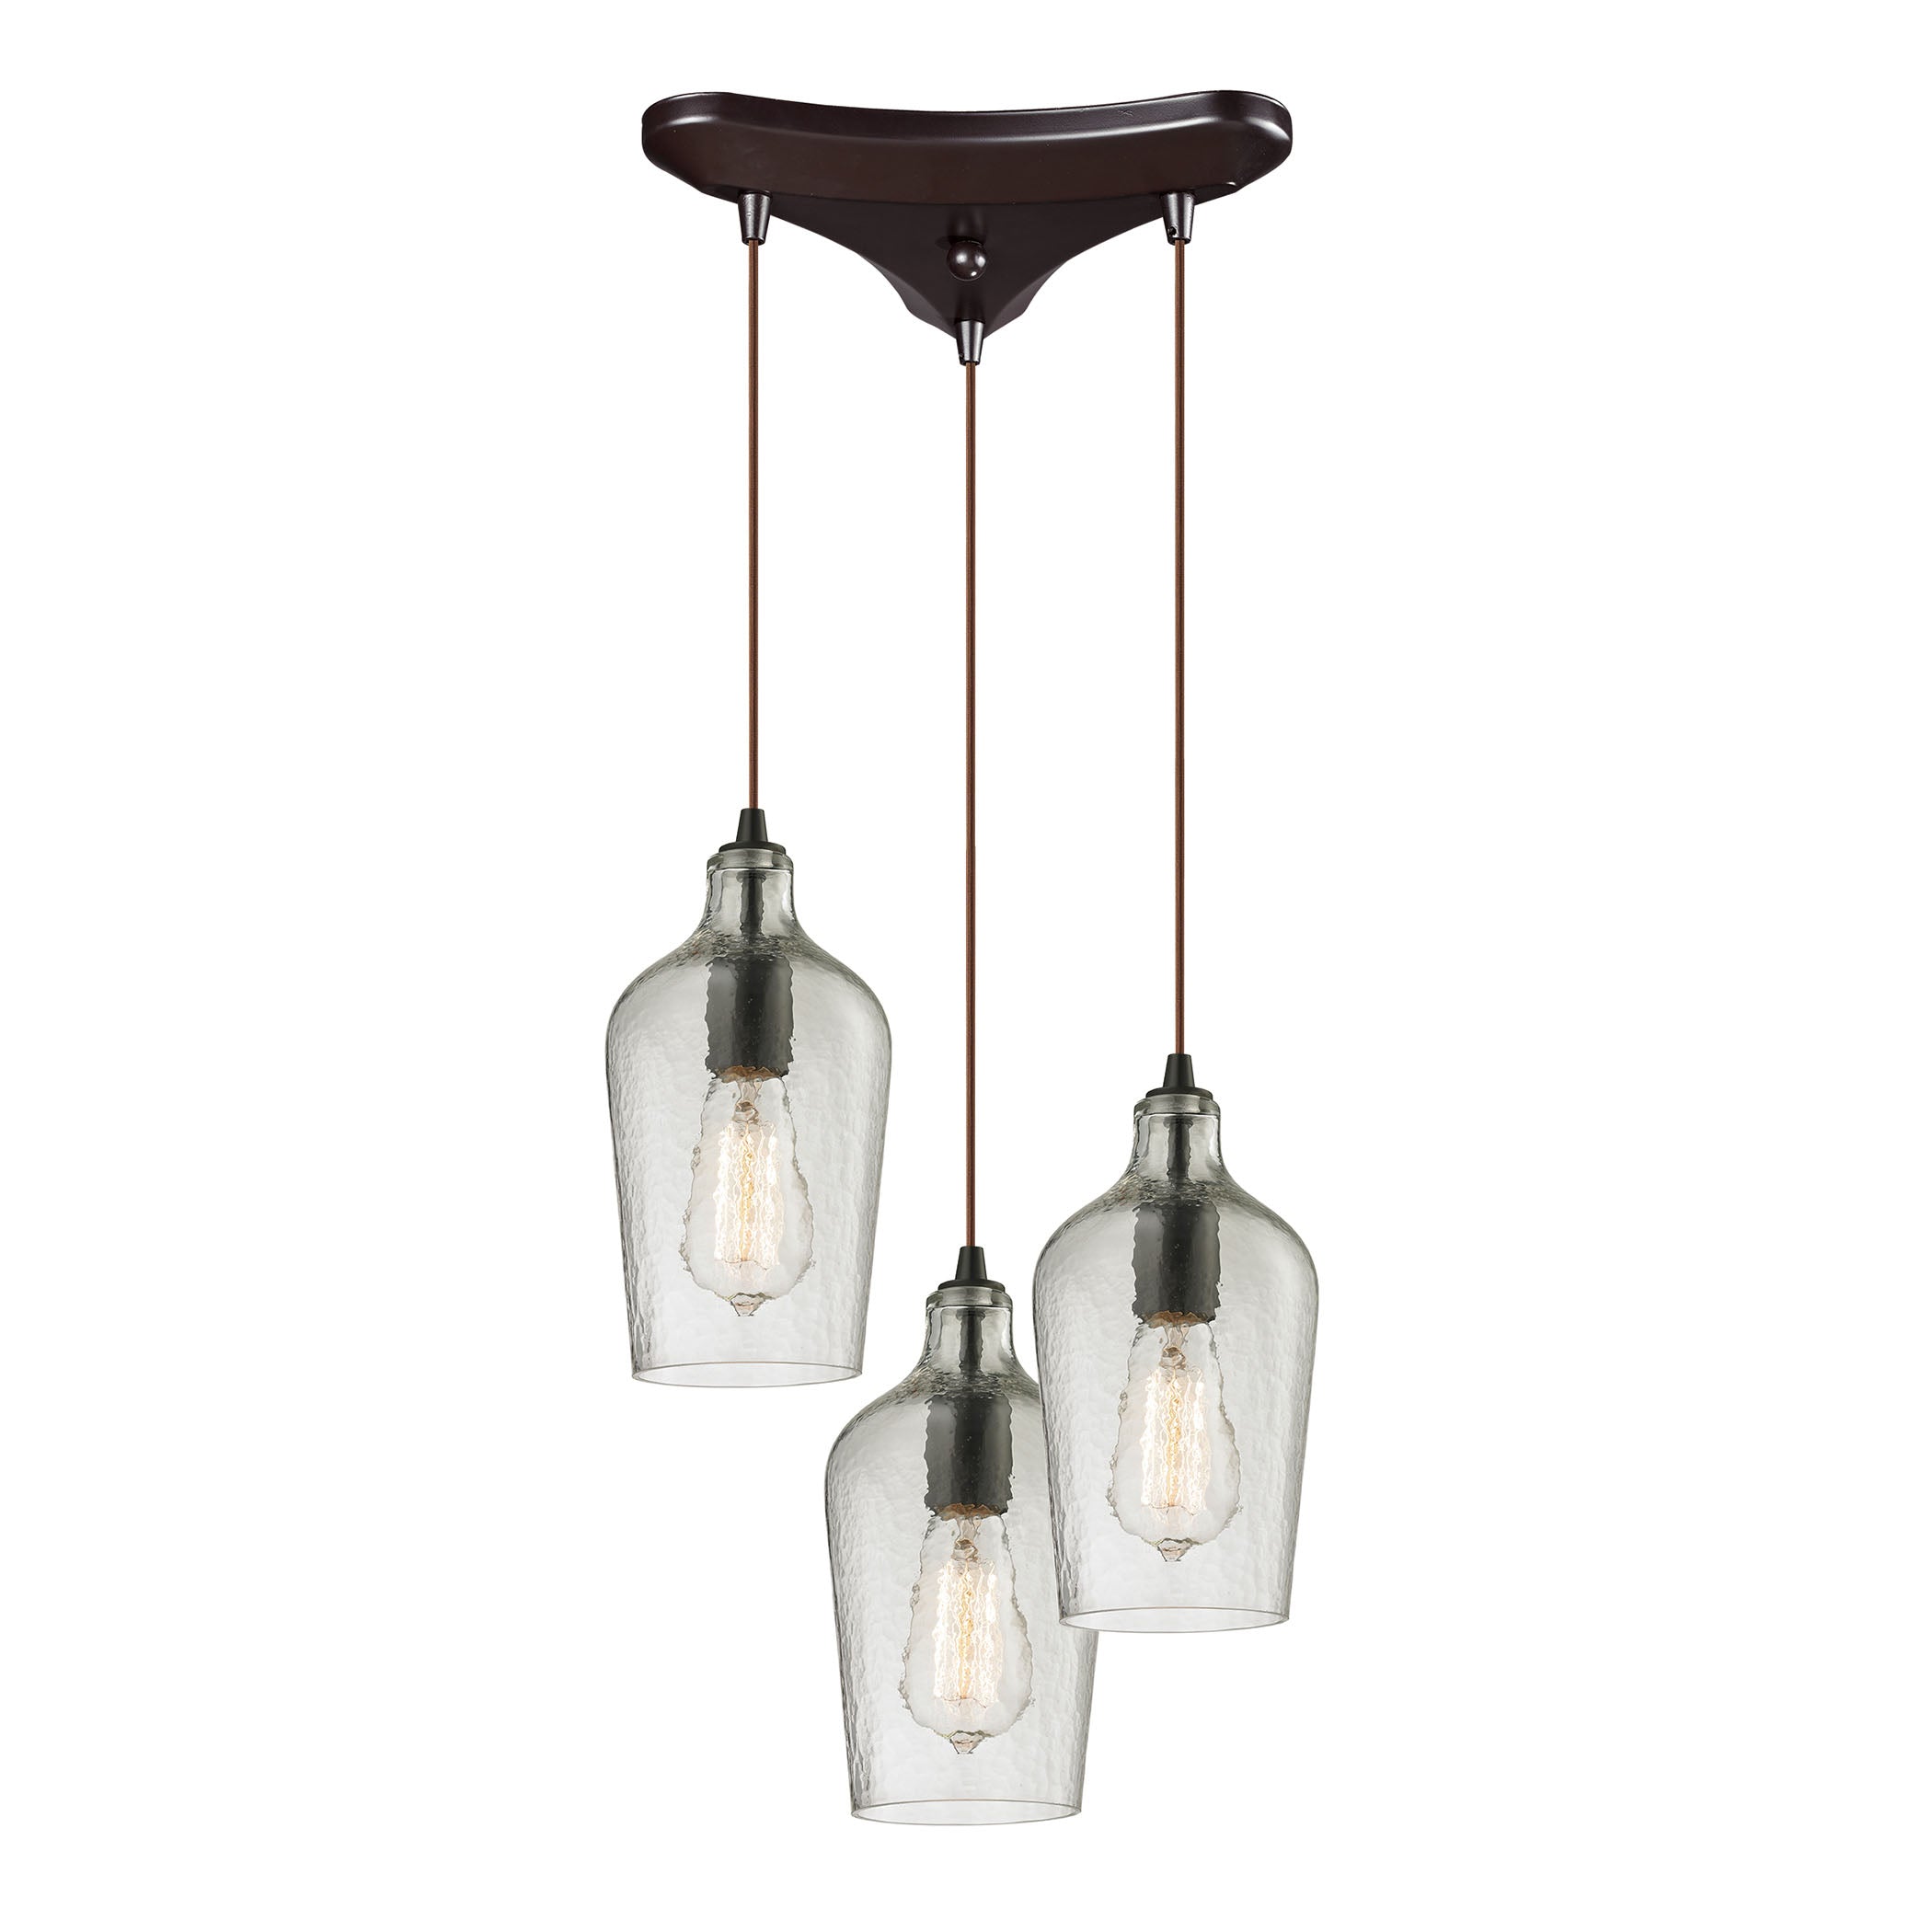 ELK Lighting 10331/3CLR Hammered Glass 3-Light Triangular Pendant Fixture in Oiled Bronze with Hammered Clear Glass